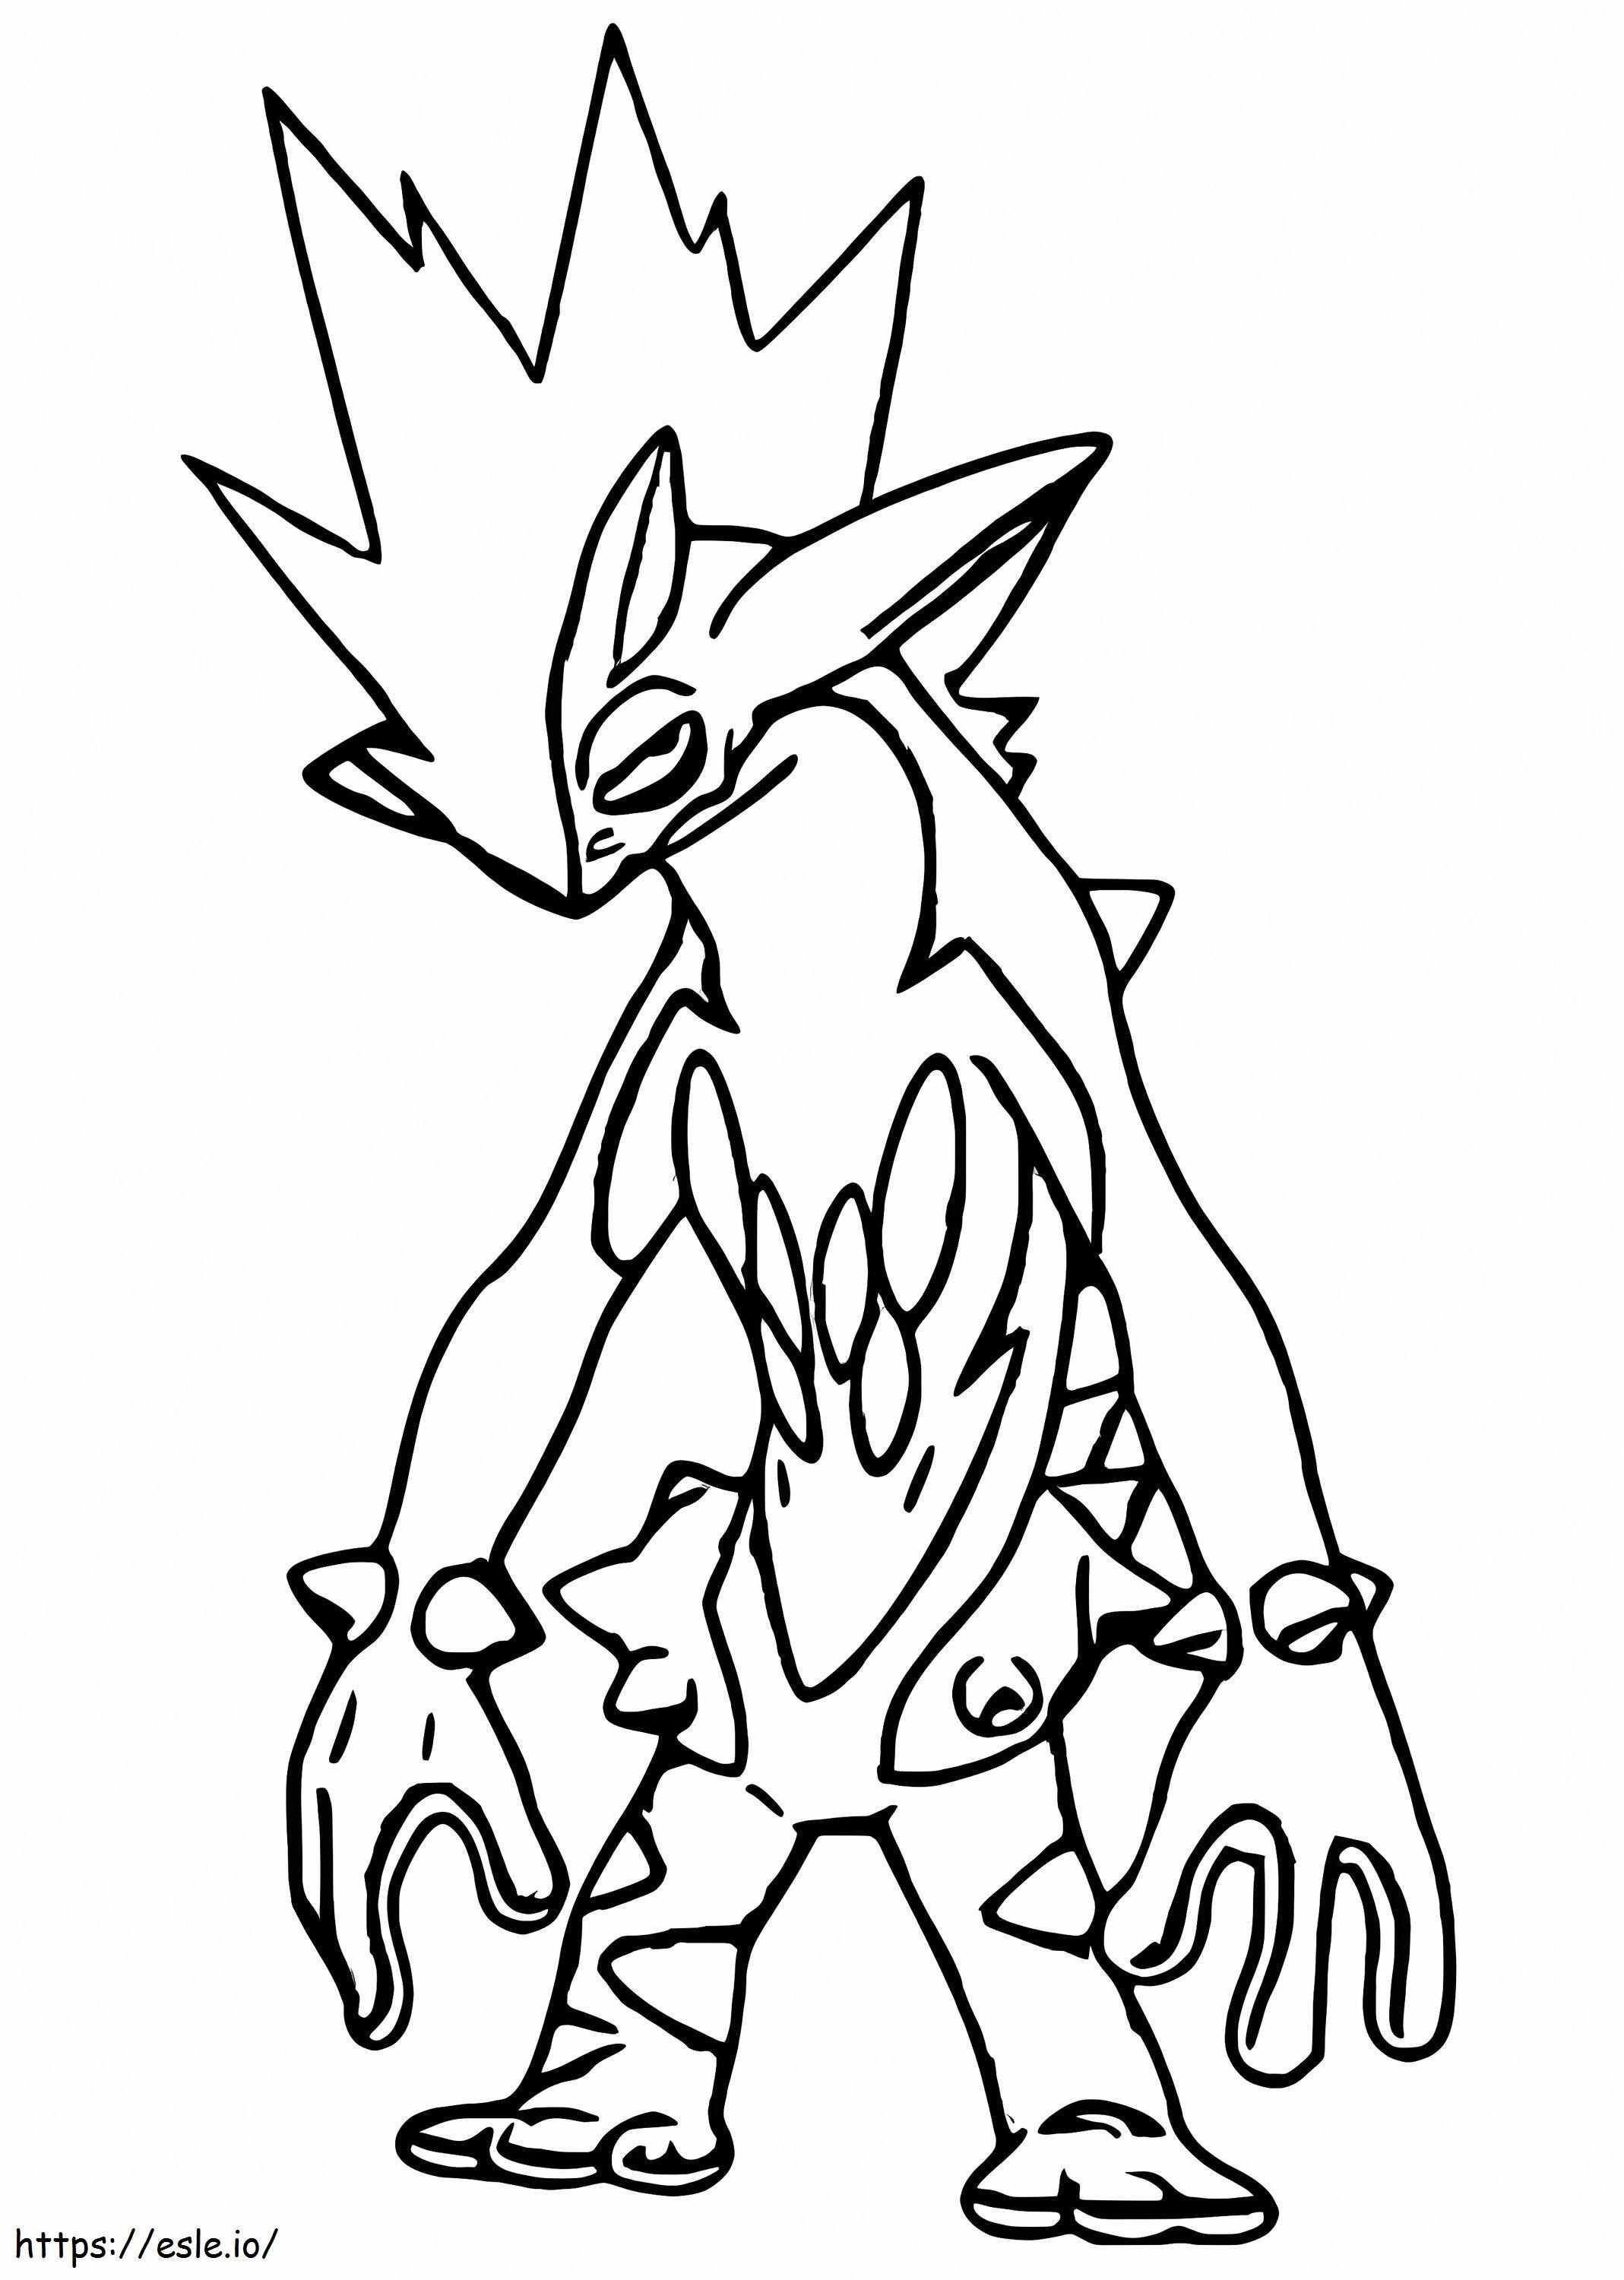 Toxtricity Pokemon coloring page